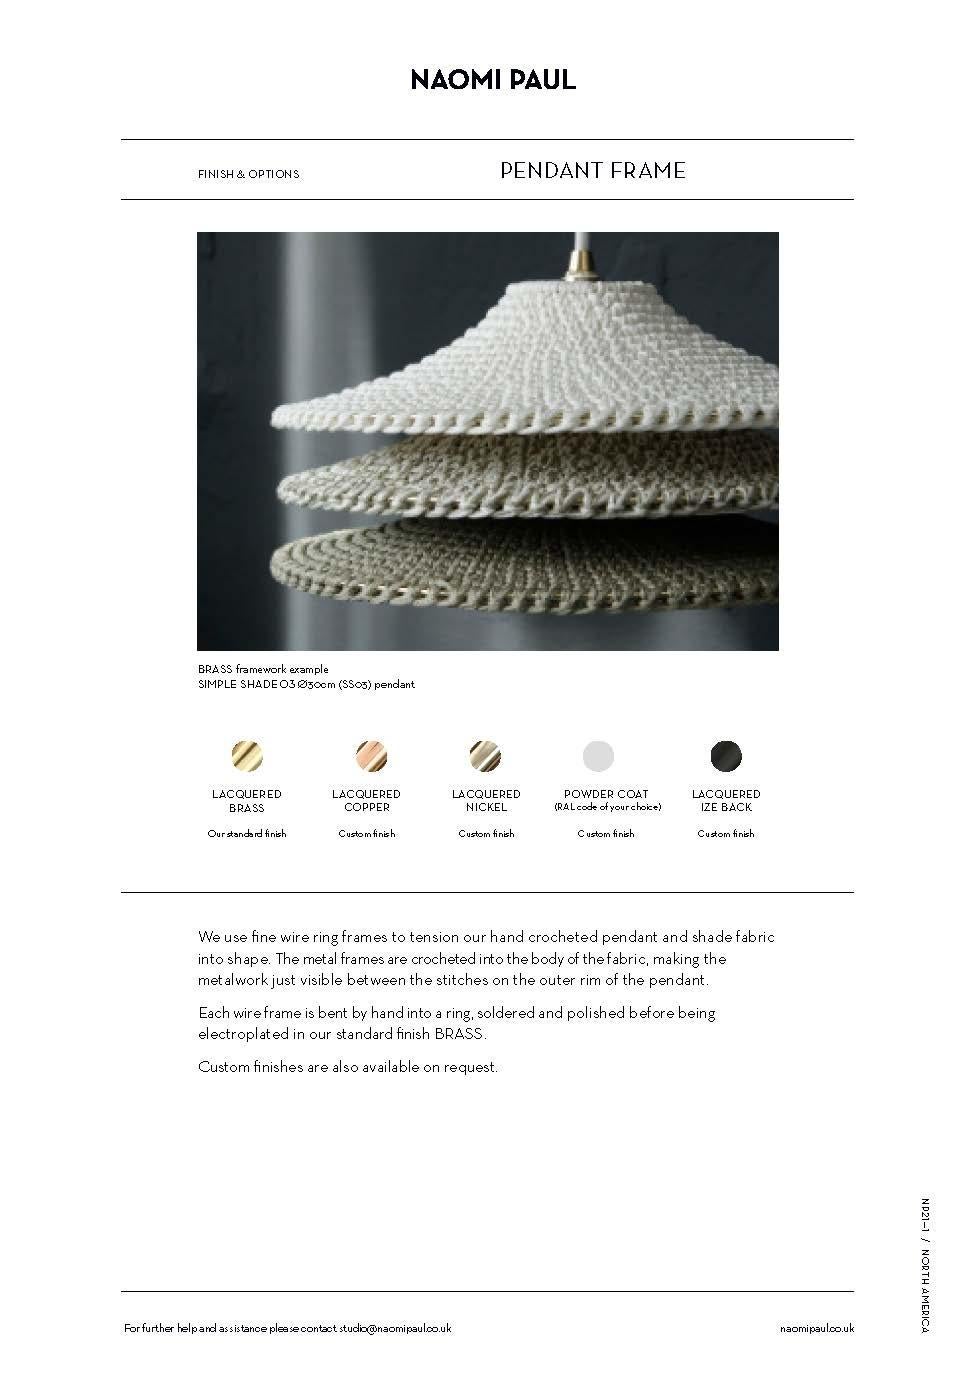 British BAMBOO SOLITAIRE 02 Pendant Light Ø60cm/23.6in, Hand Crocheted in Bamboo Paper